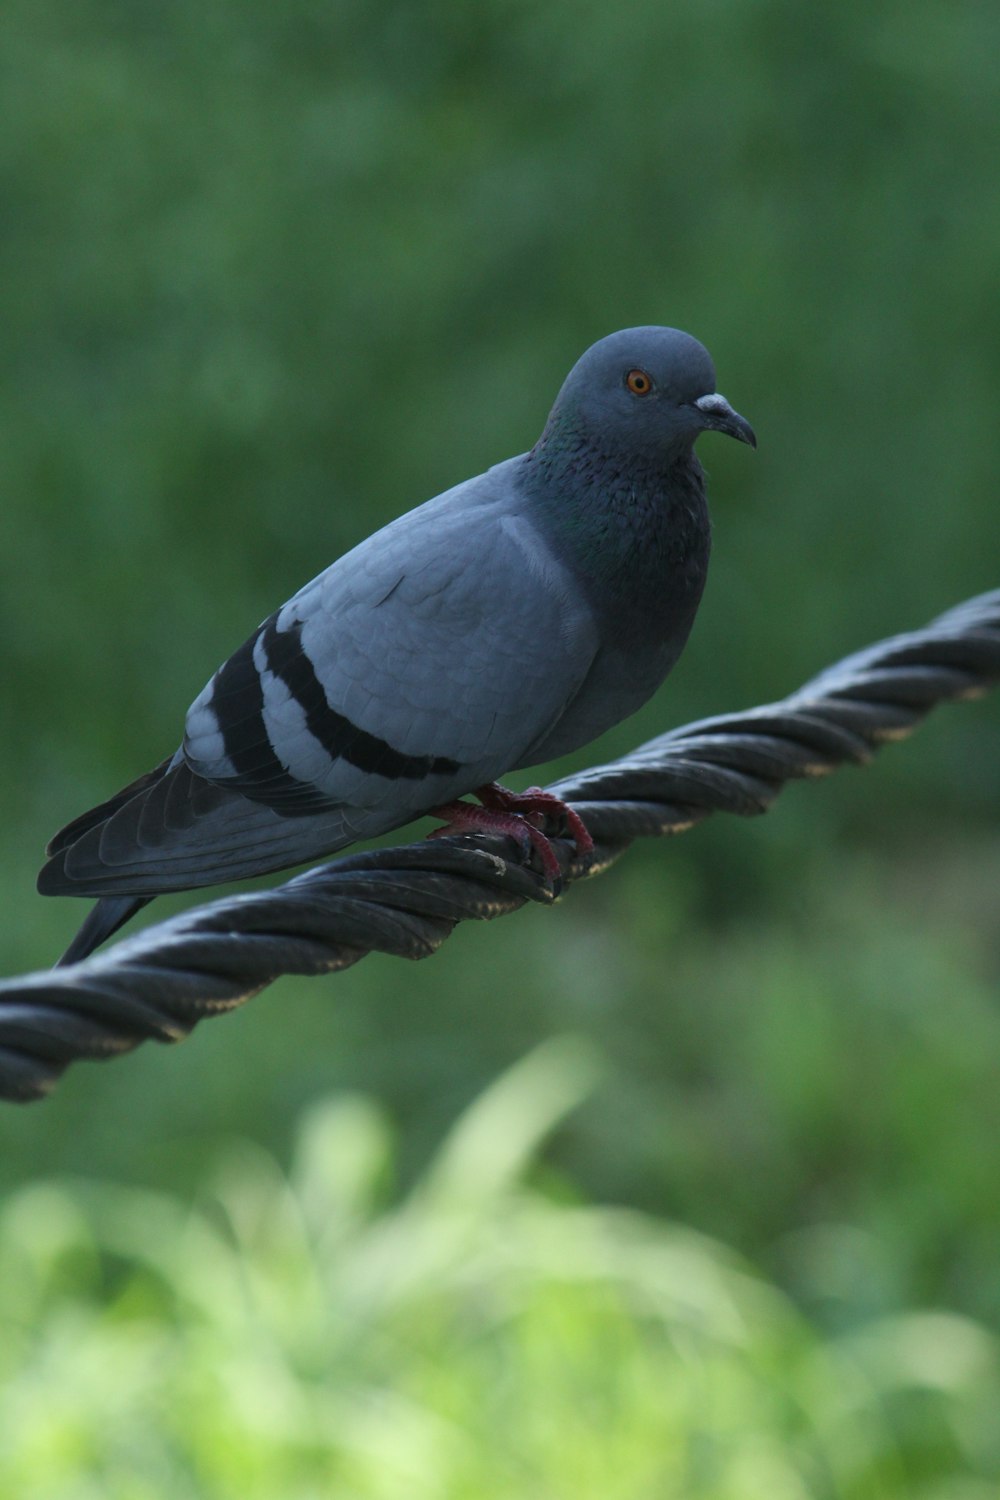 a pigeon sitting on a rope in front of a green background